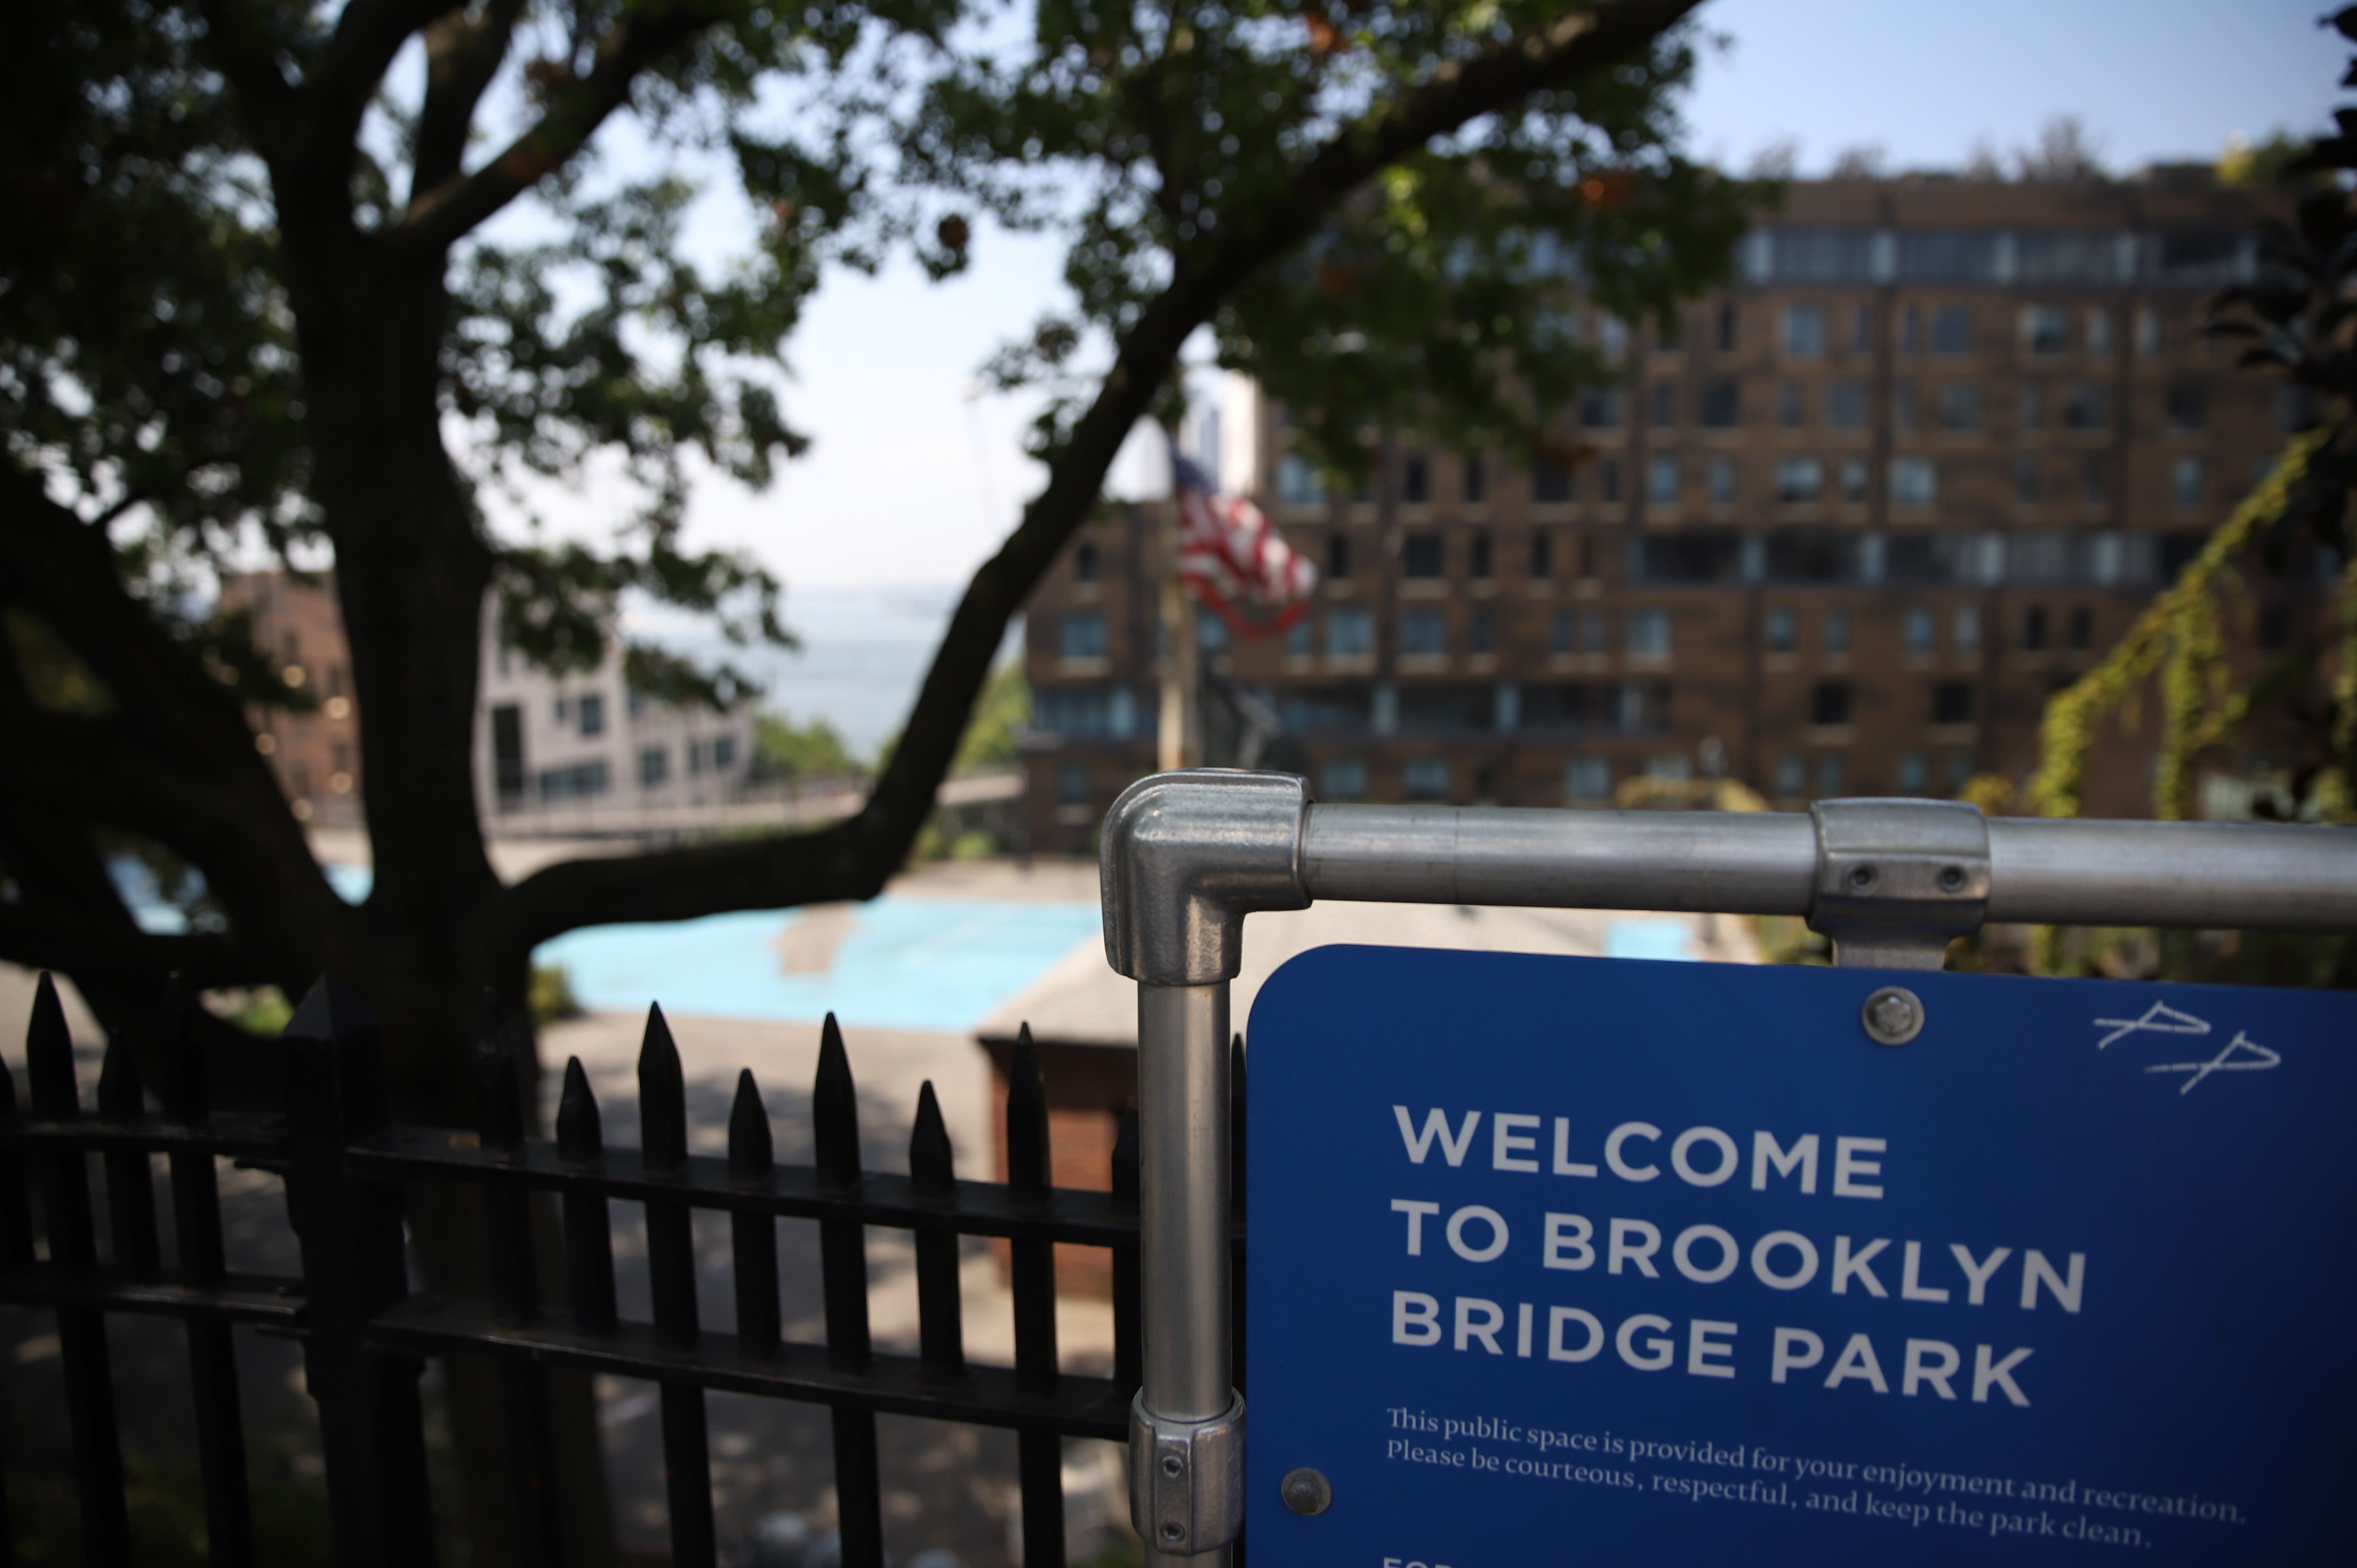 The Pierhouse building can be seen in the distance from one of Brooklyn Bridge Park’s entrances.